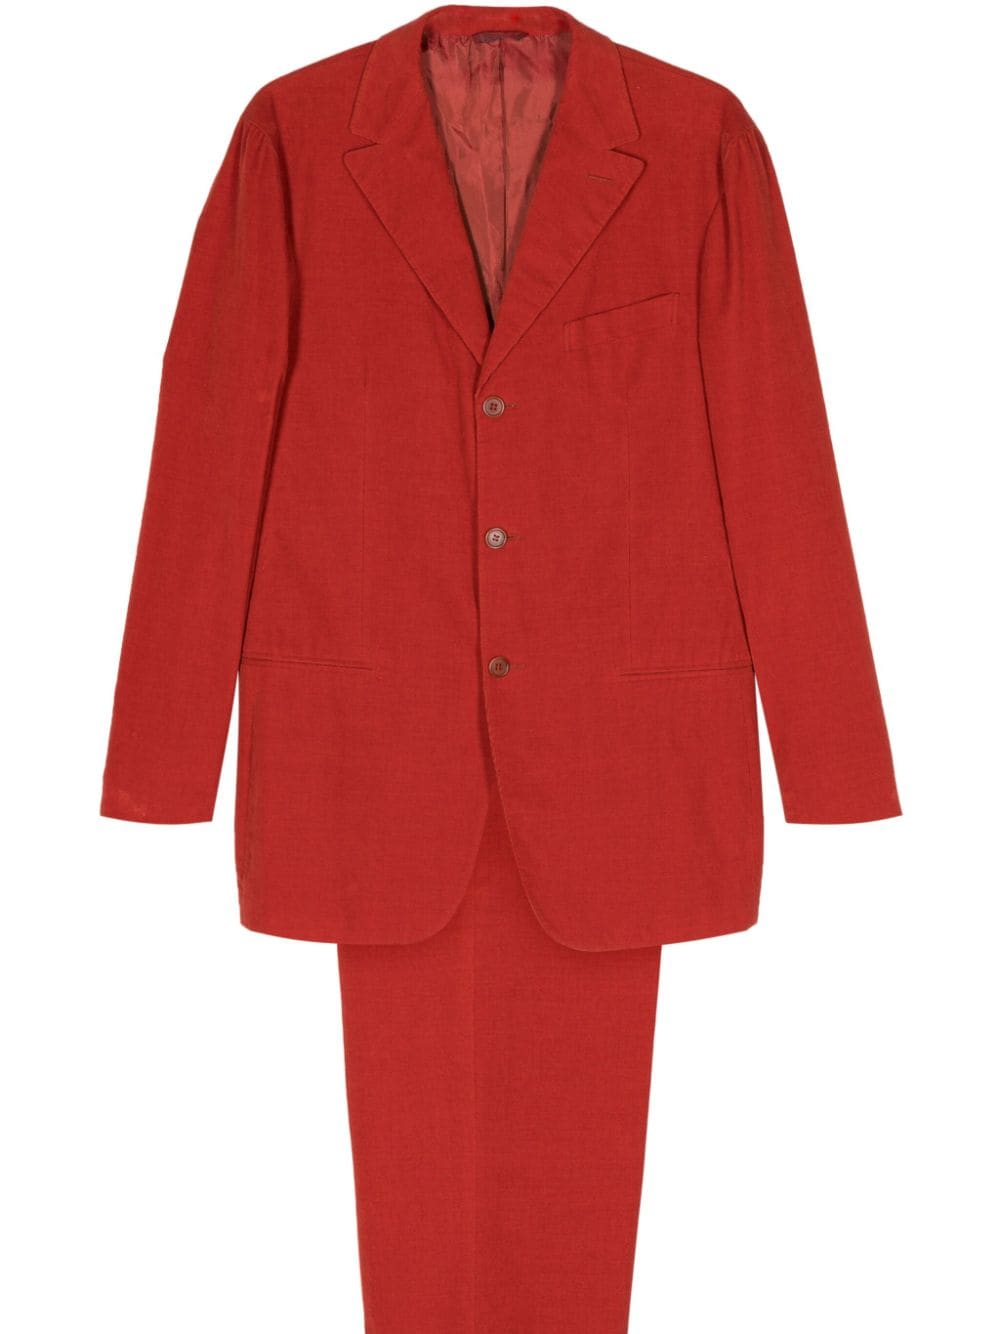 1990s corduroy single-breasted suit